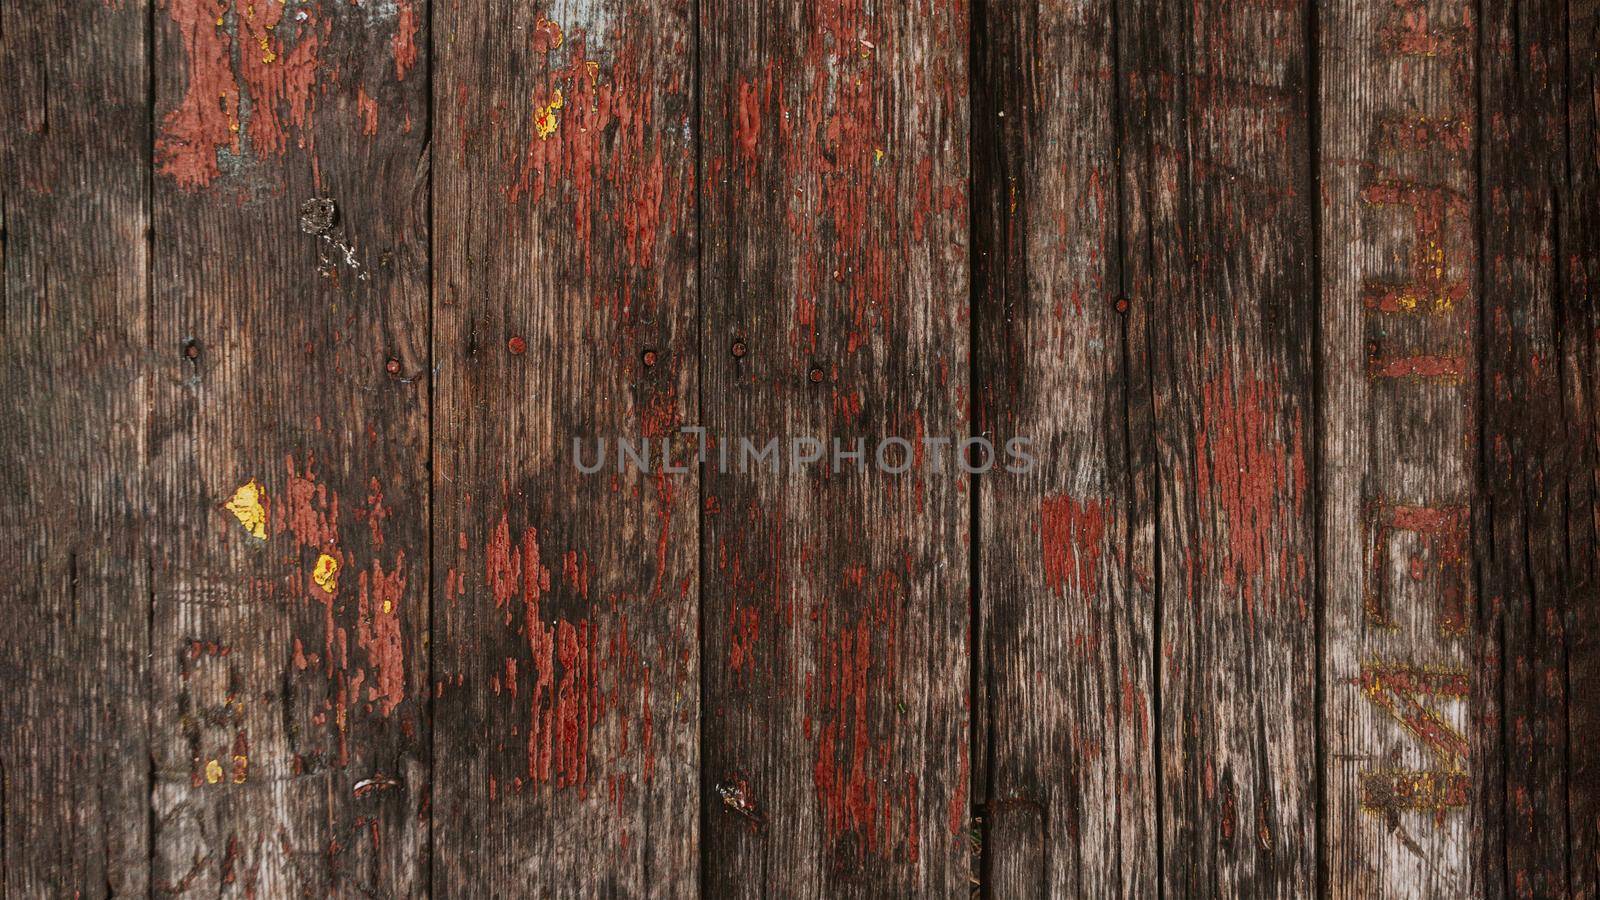 Brown wood texture with cracked paint residues.Abstract background,blank template.rustic weathered wood barn background with knots and nail holes.Cover the walls with wooden planks.Copy space.